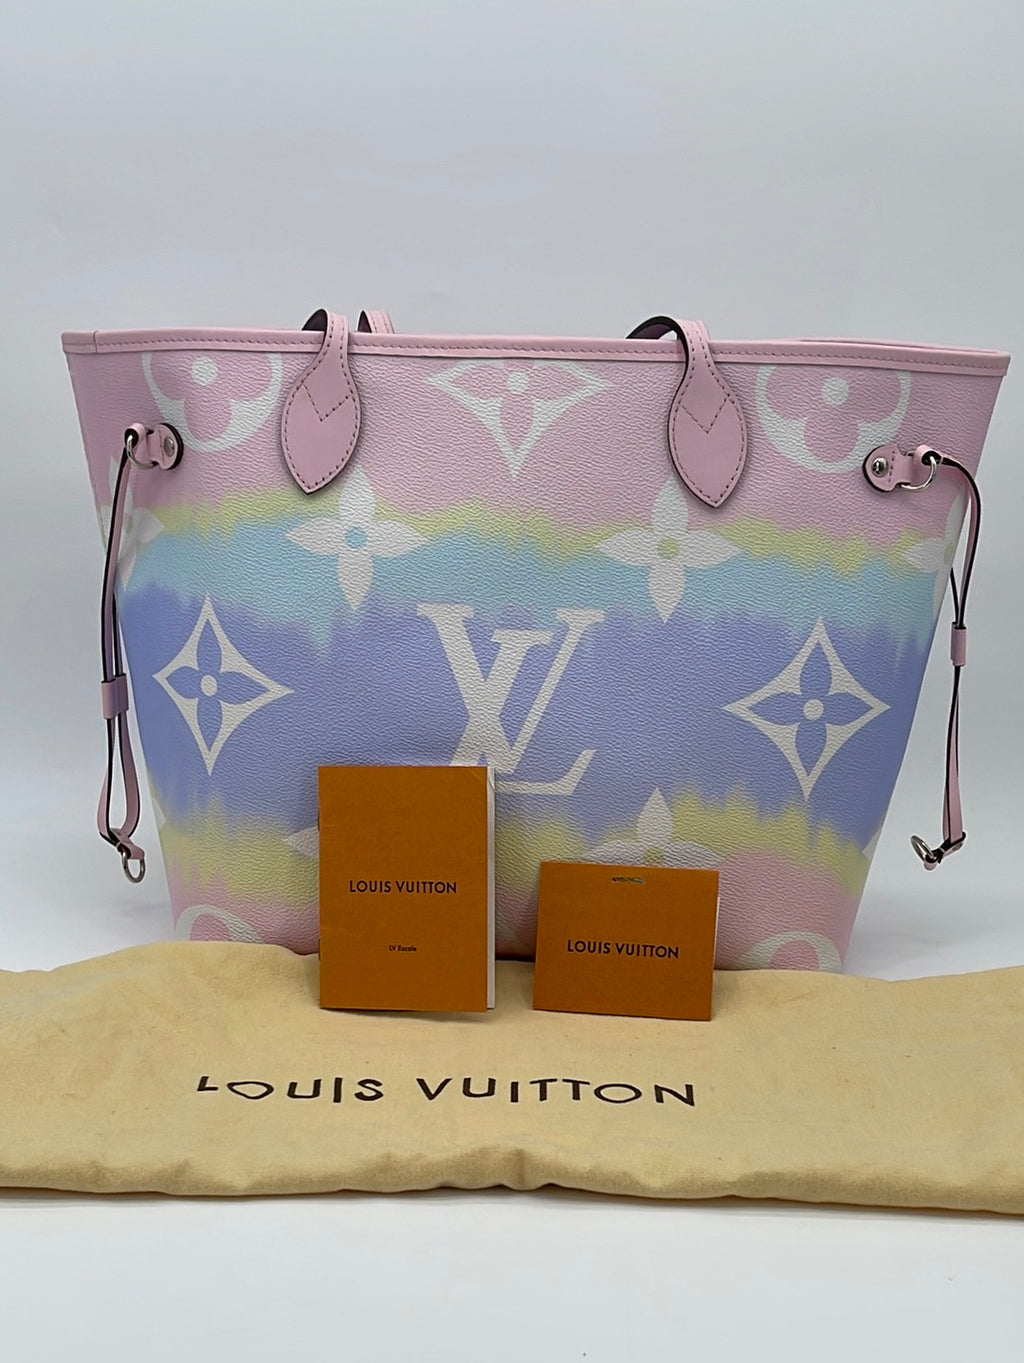 Dashain bumper sale Lv 3 in 1 bag rs 1250 only , quality bag at super